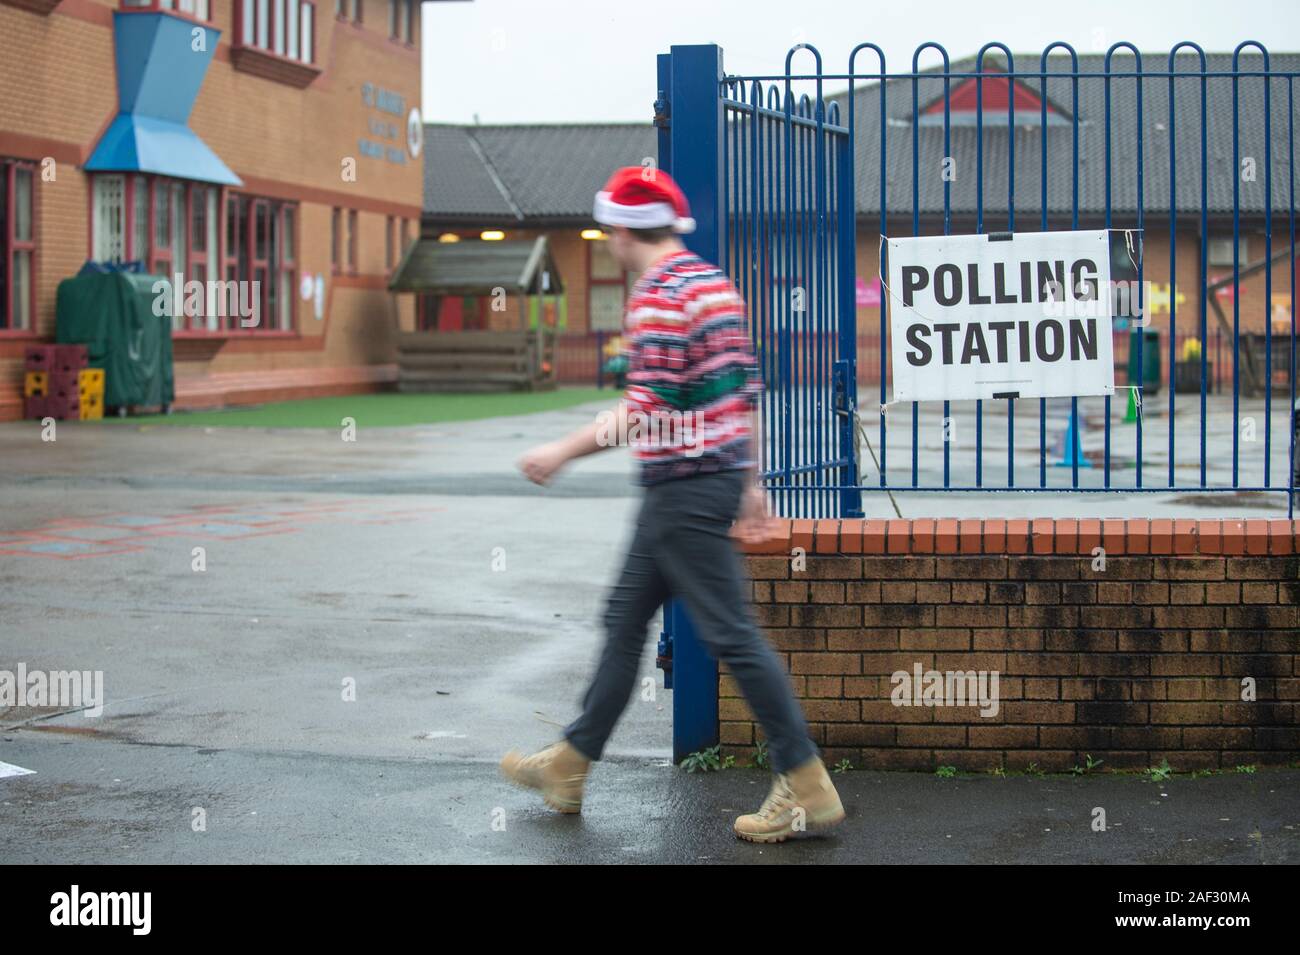 Stoke-on-Trent, UK. 12 December 2019. A voter takes a selfie outside a polling station while wearing a santa hat and christmas jumper in the rain. Stoke-on-Trent central is a key General Election battleground for both Labour and Conservatives. [EDITORIAL NOTE: Male shown in photograph did not provide name but consented to photo being used for editorial usage] Credit: Benjamin Wareing/ Alamy Live News Stock Photo